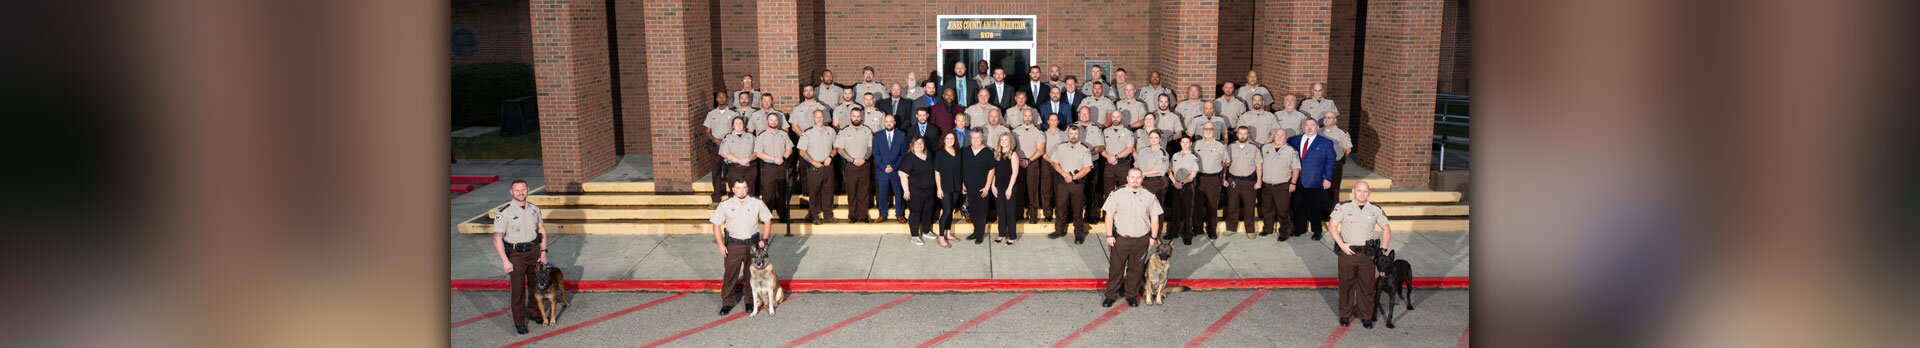 Jones County Sheriff's office personnel photo with k9s